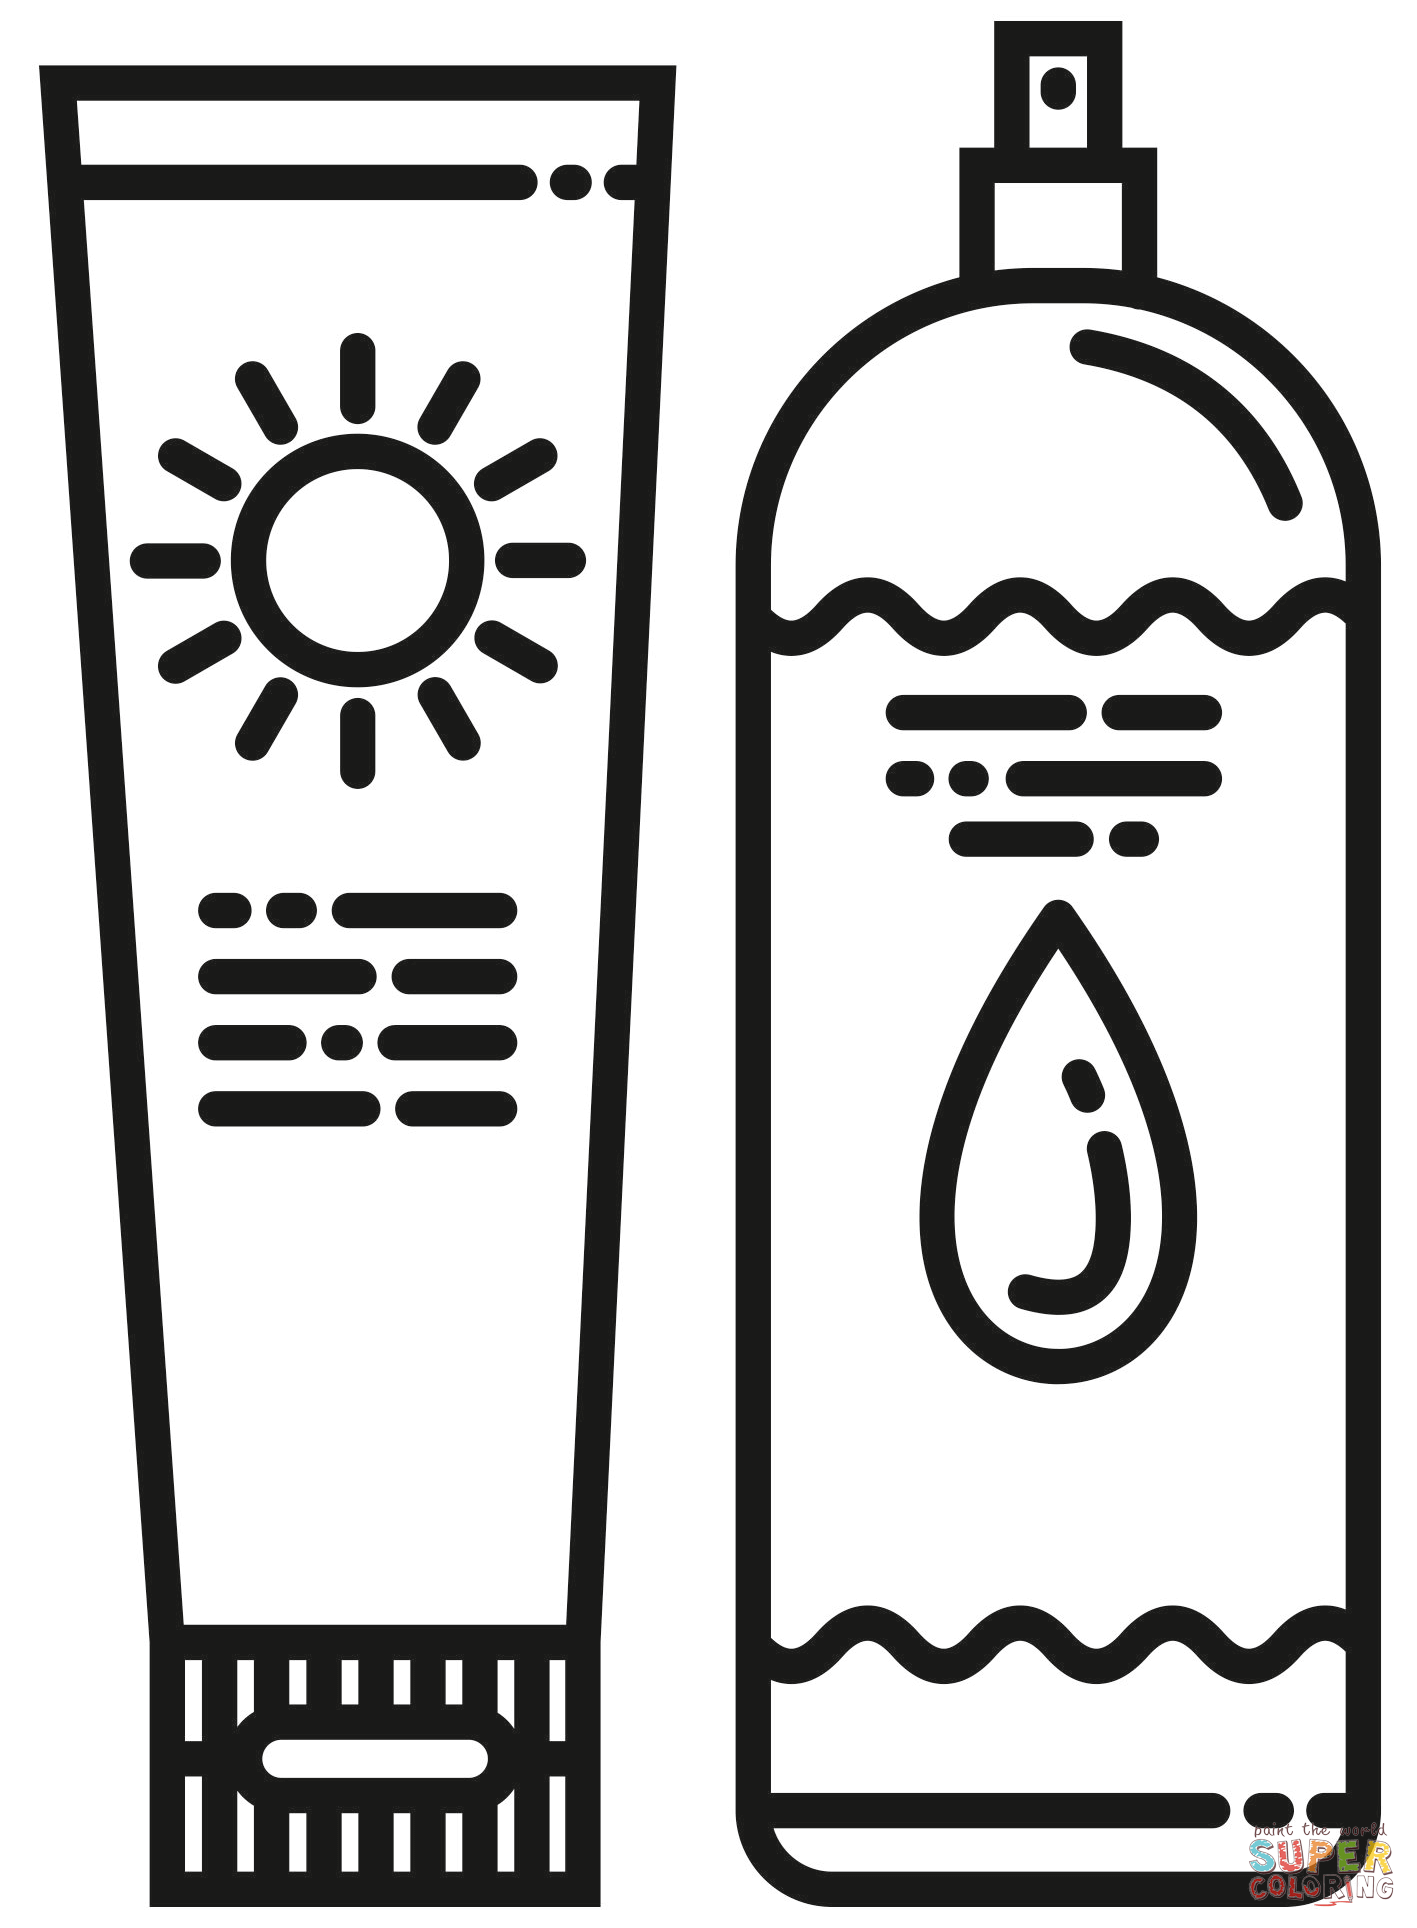 Sunscreen coloring page free printable coloring pages